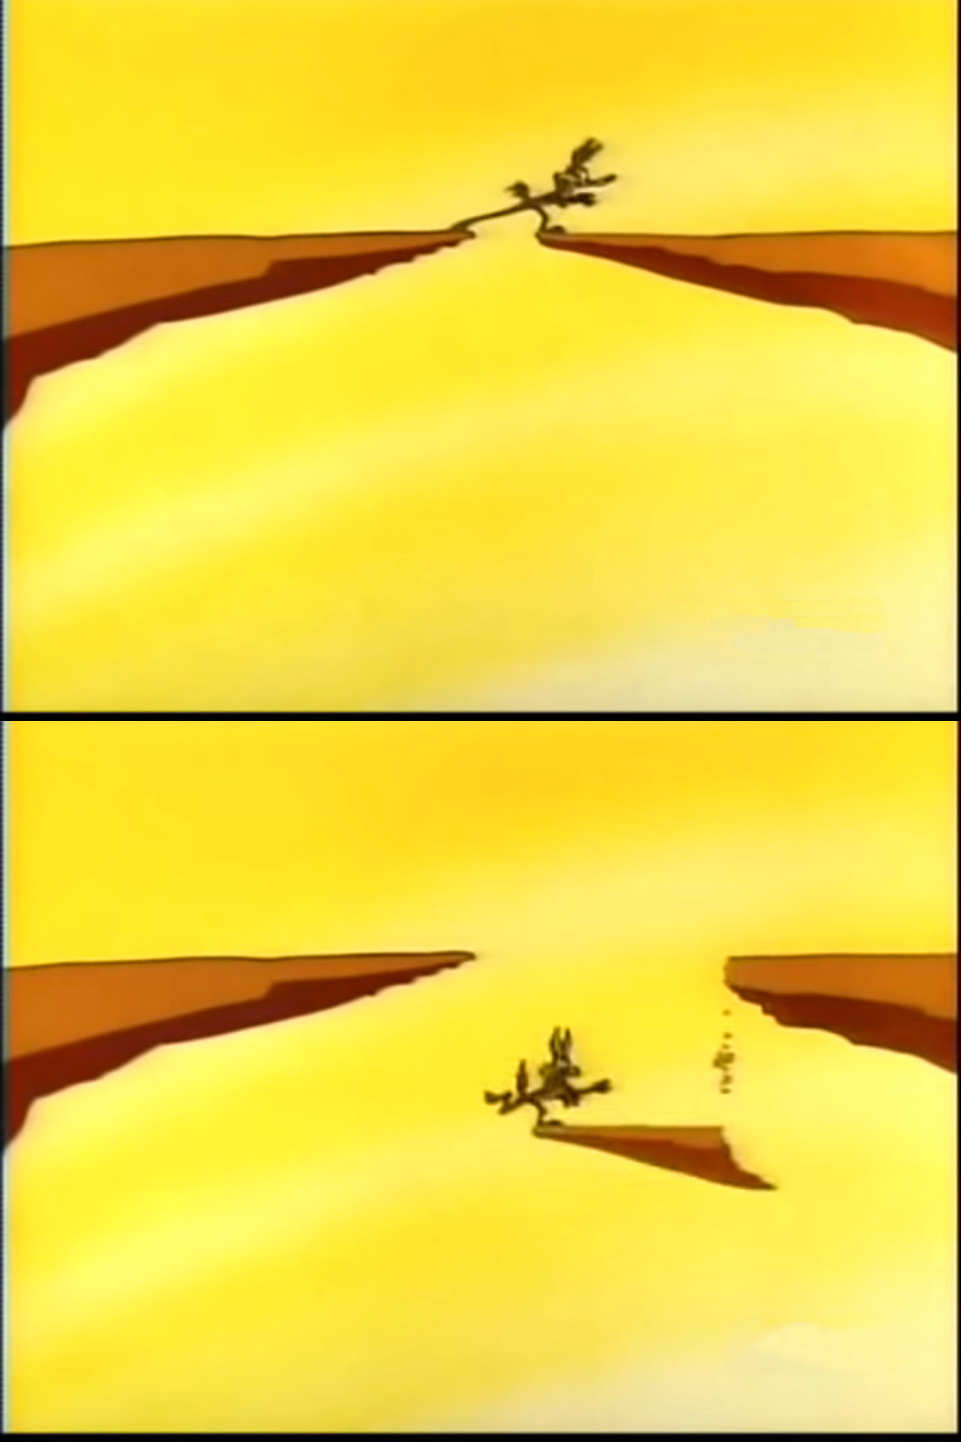 High Quality Wile E Coyote walking across cliff (Road Runner looney tunes) Blank Meme Template